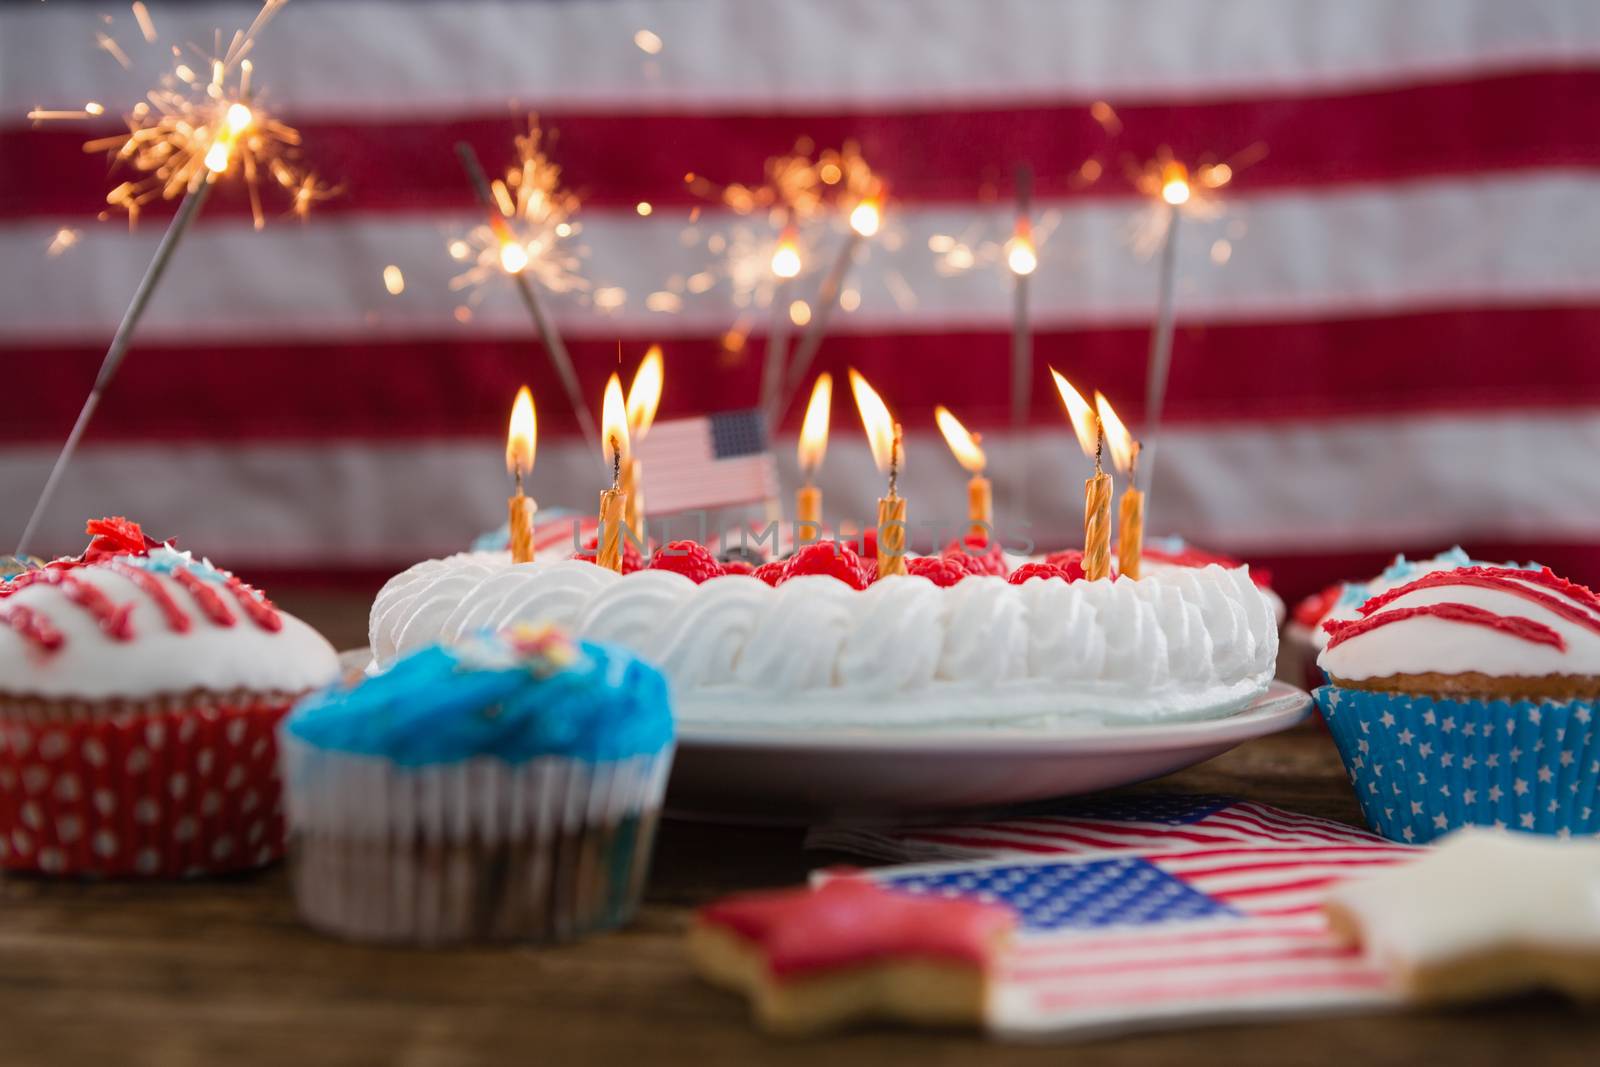 Patriotic 4th of july cake and cupcake by Wavebreakmedia